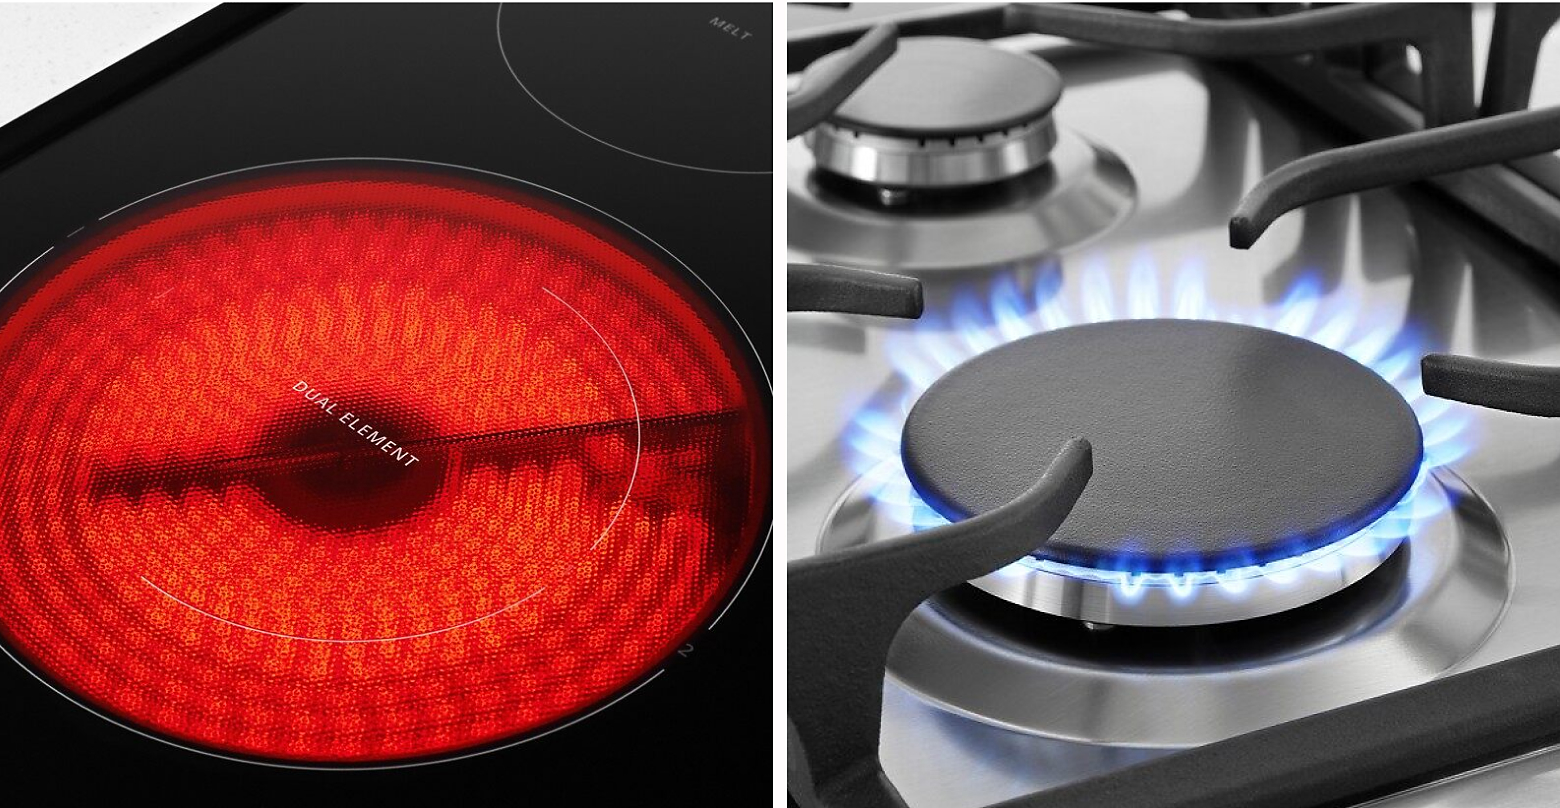 Close up side-by-side image of an electric burner and a gas burner